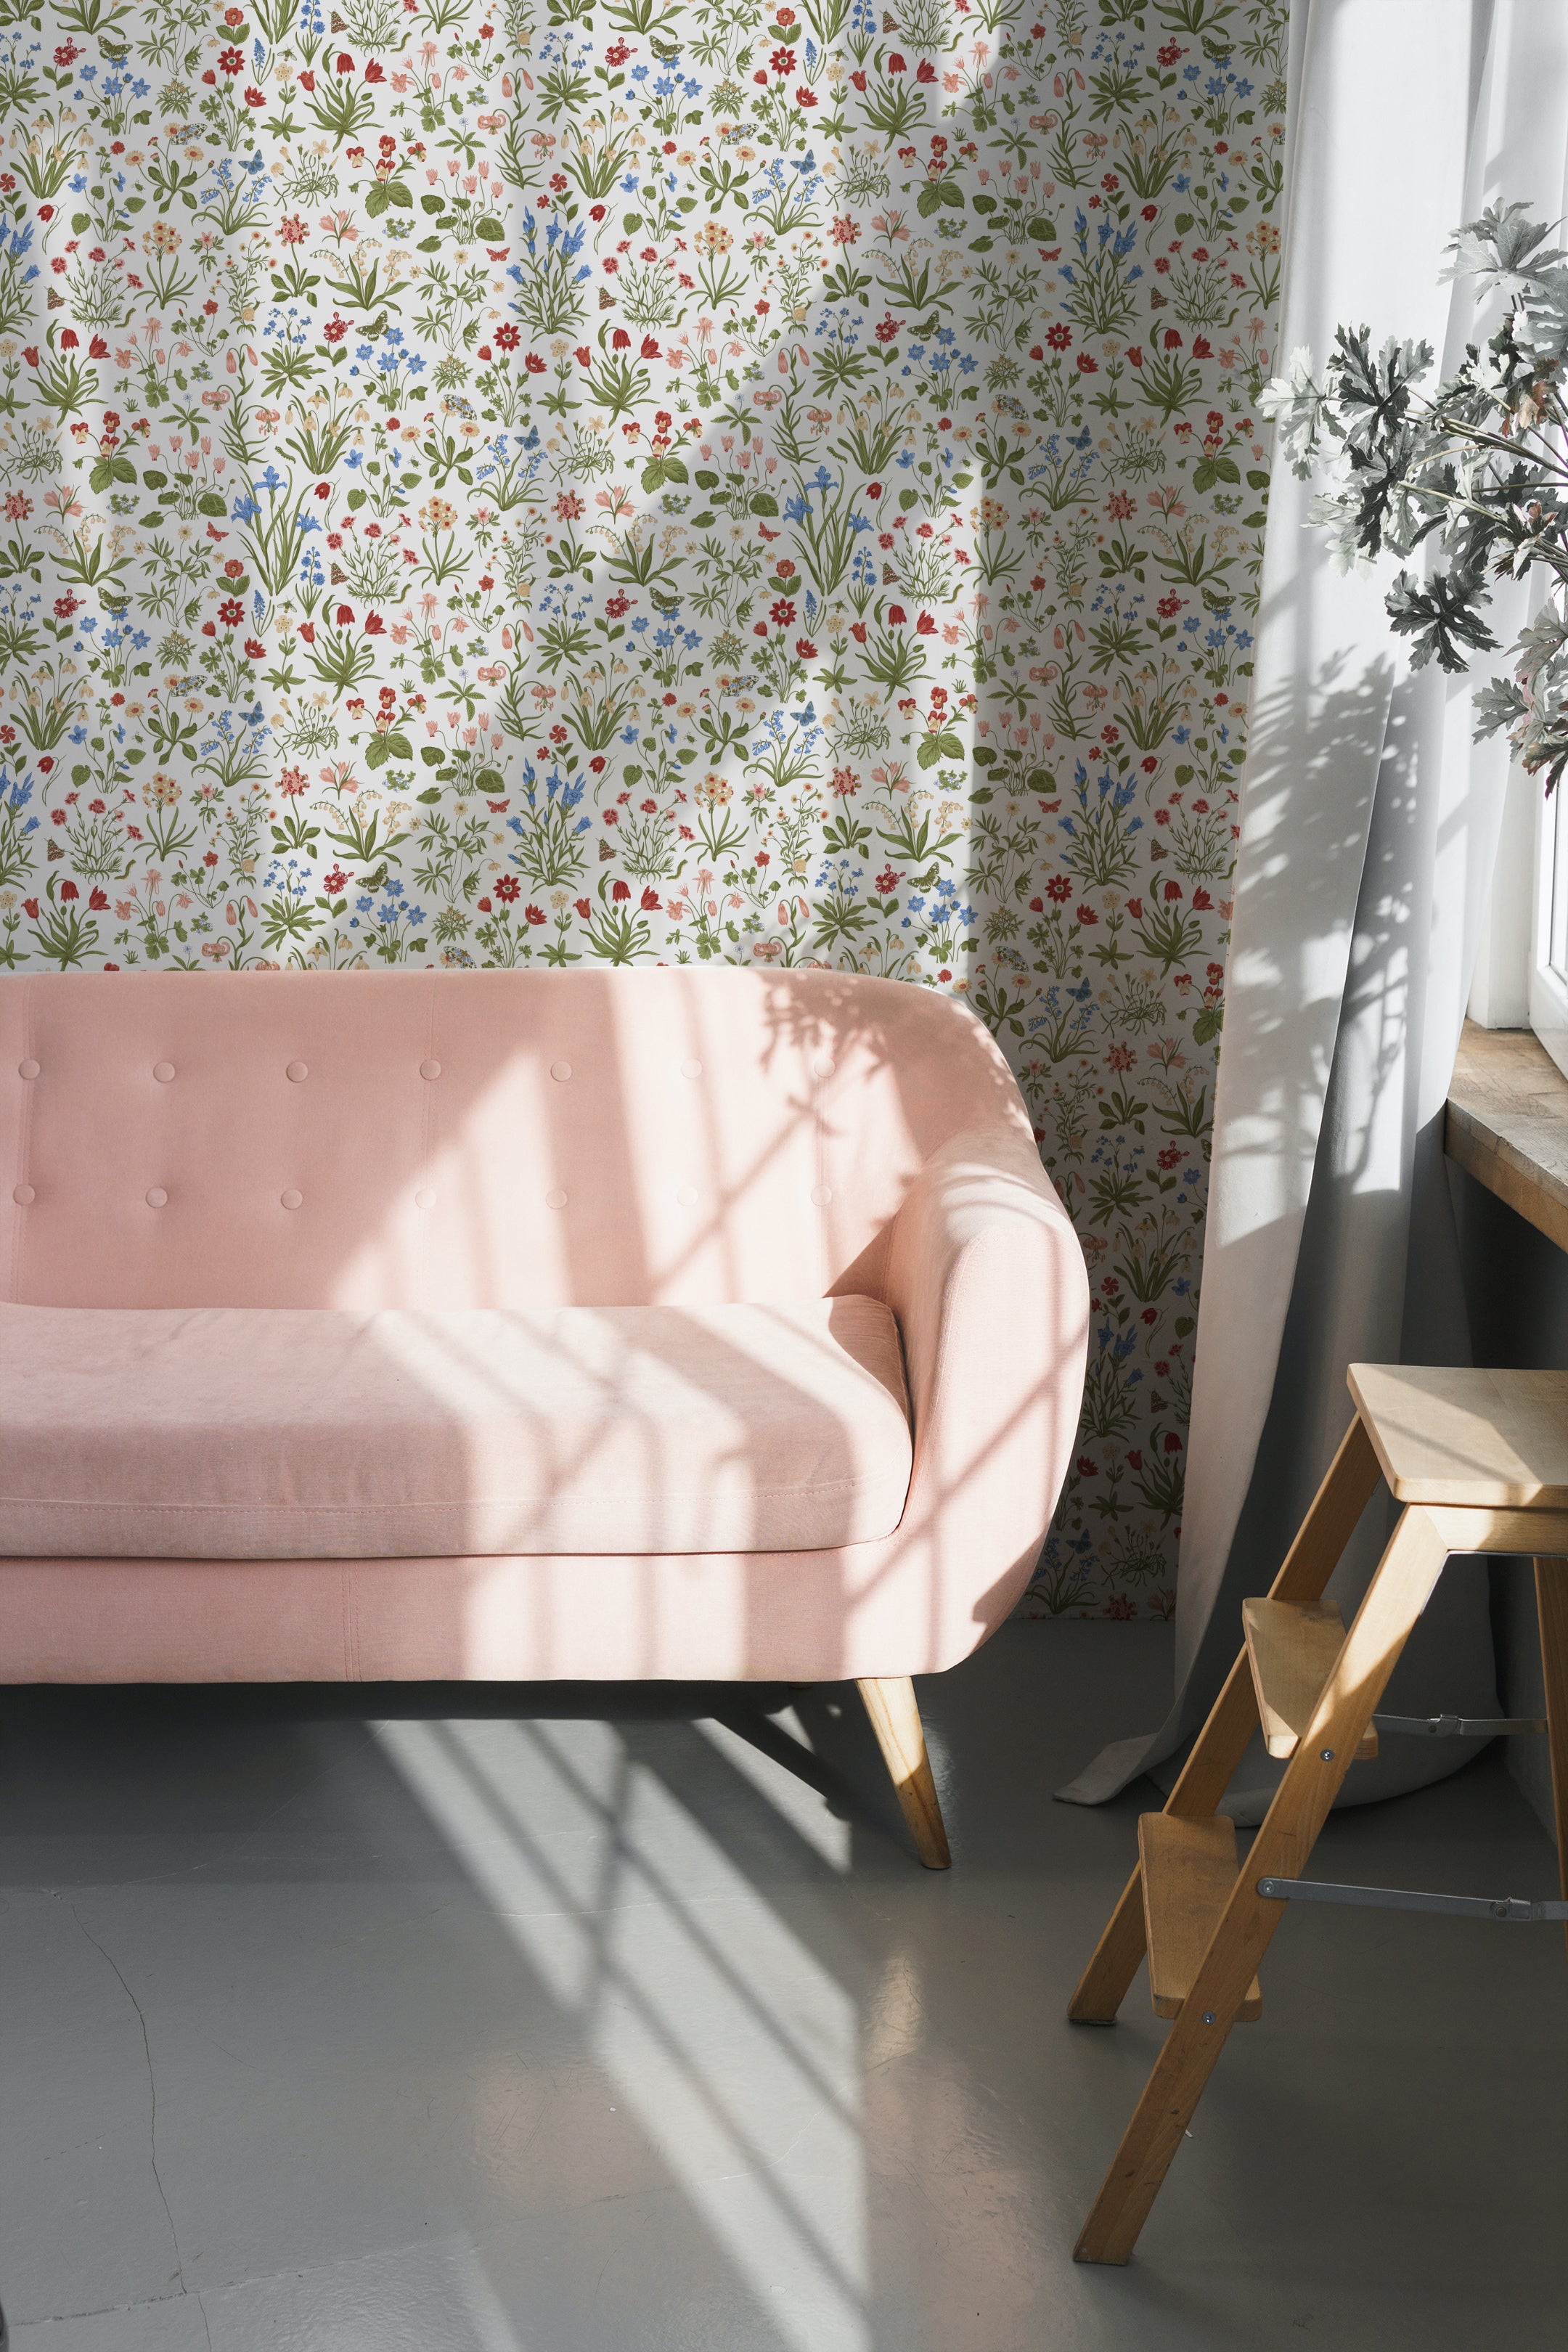 Chic living room decorated with 'Garden Fantasy Wallpaper', creating a bright and inviting space with its detailed floral print. The room is styled with a blush pink sofa and simple wooden furniture, reflecting a modern yet rustic decor style.